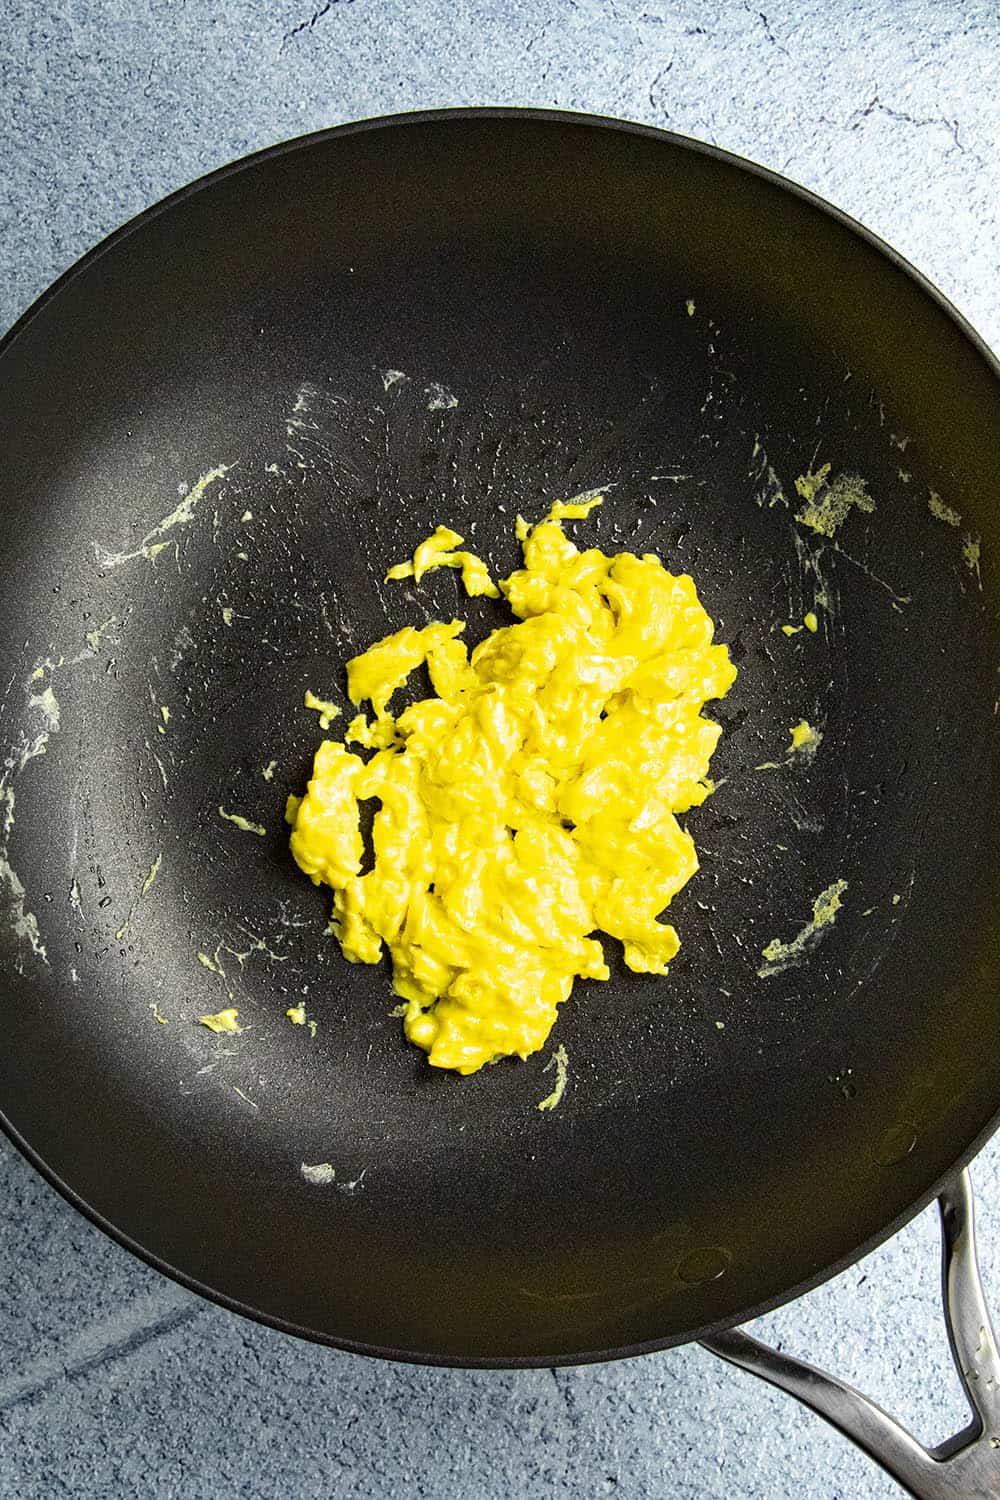 Cooking scrambled eggs in a hot pan